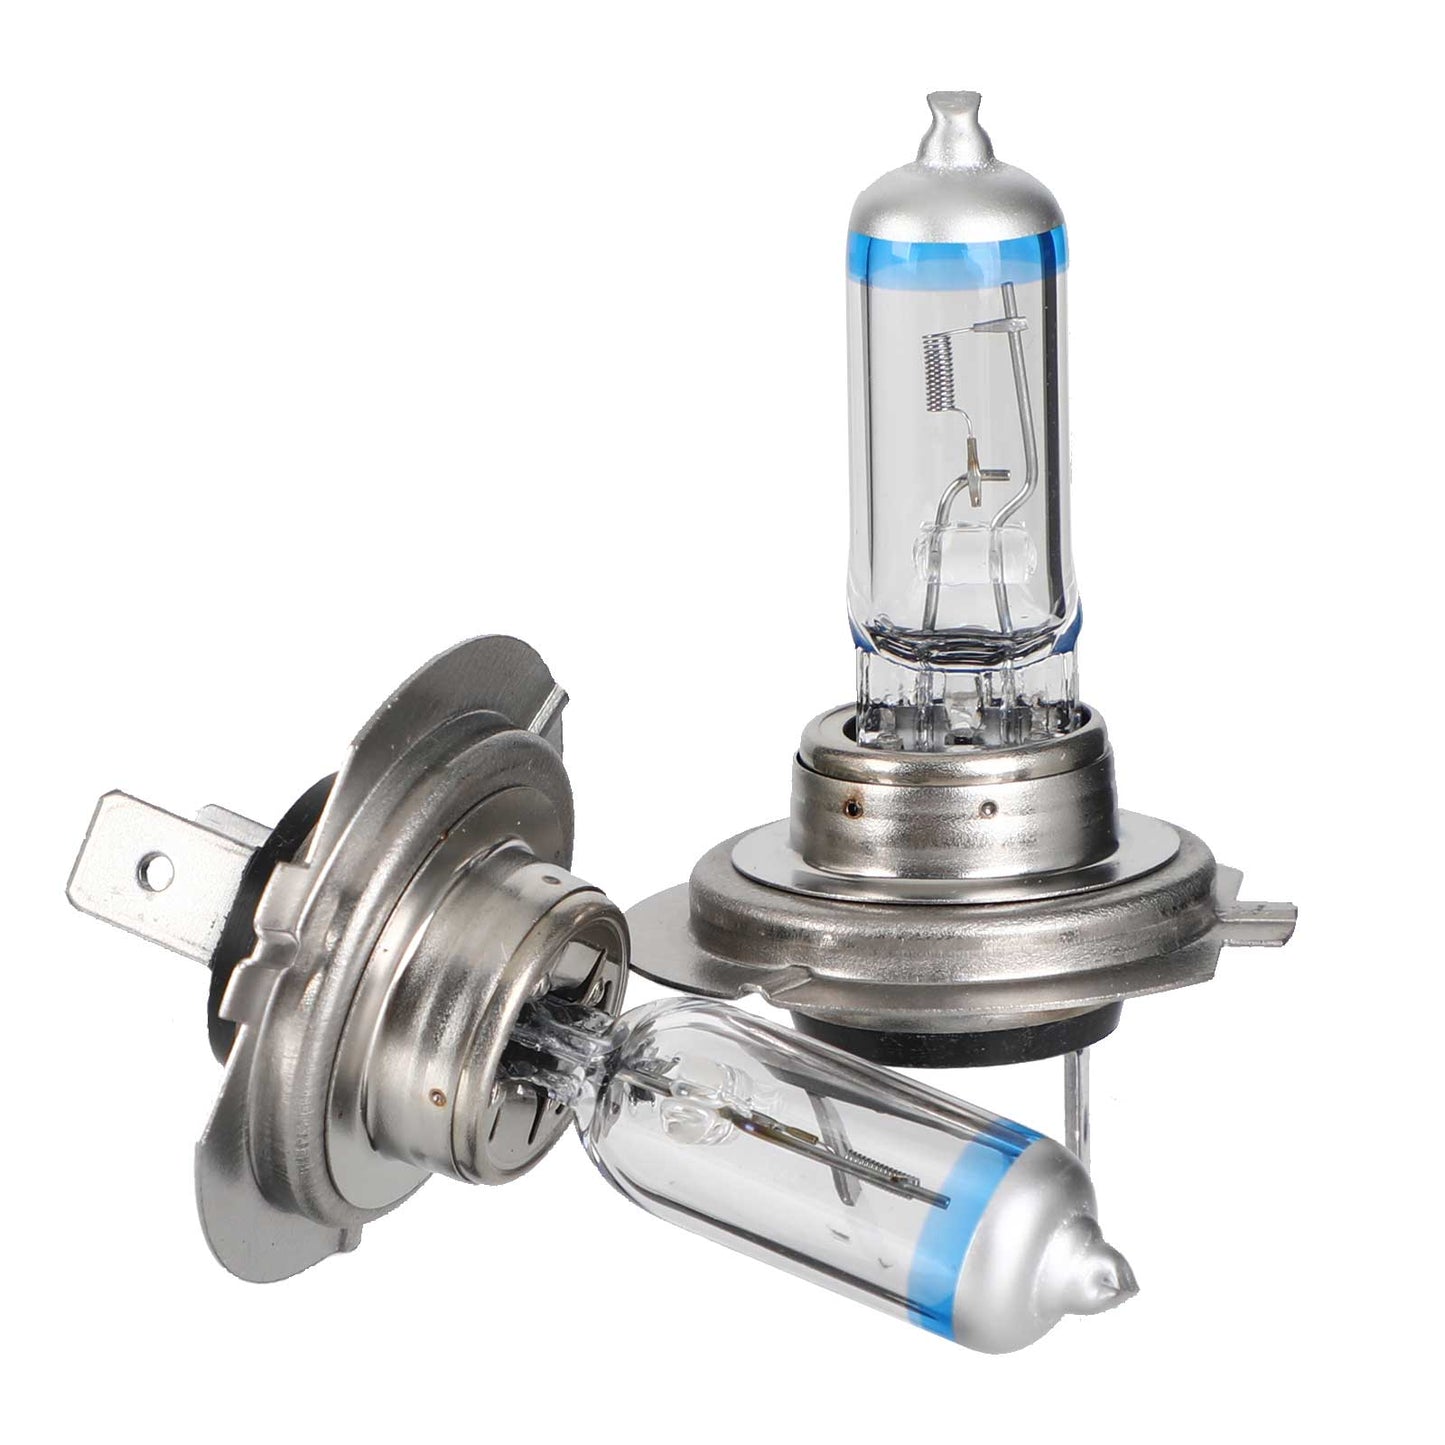 H7 Car Headlight For GE Megalight Ultra UP TO +90% Area Extented 12lux 55W